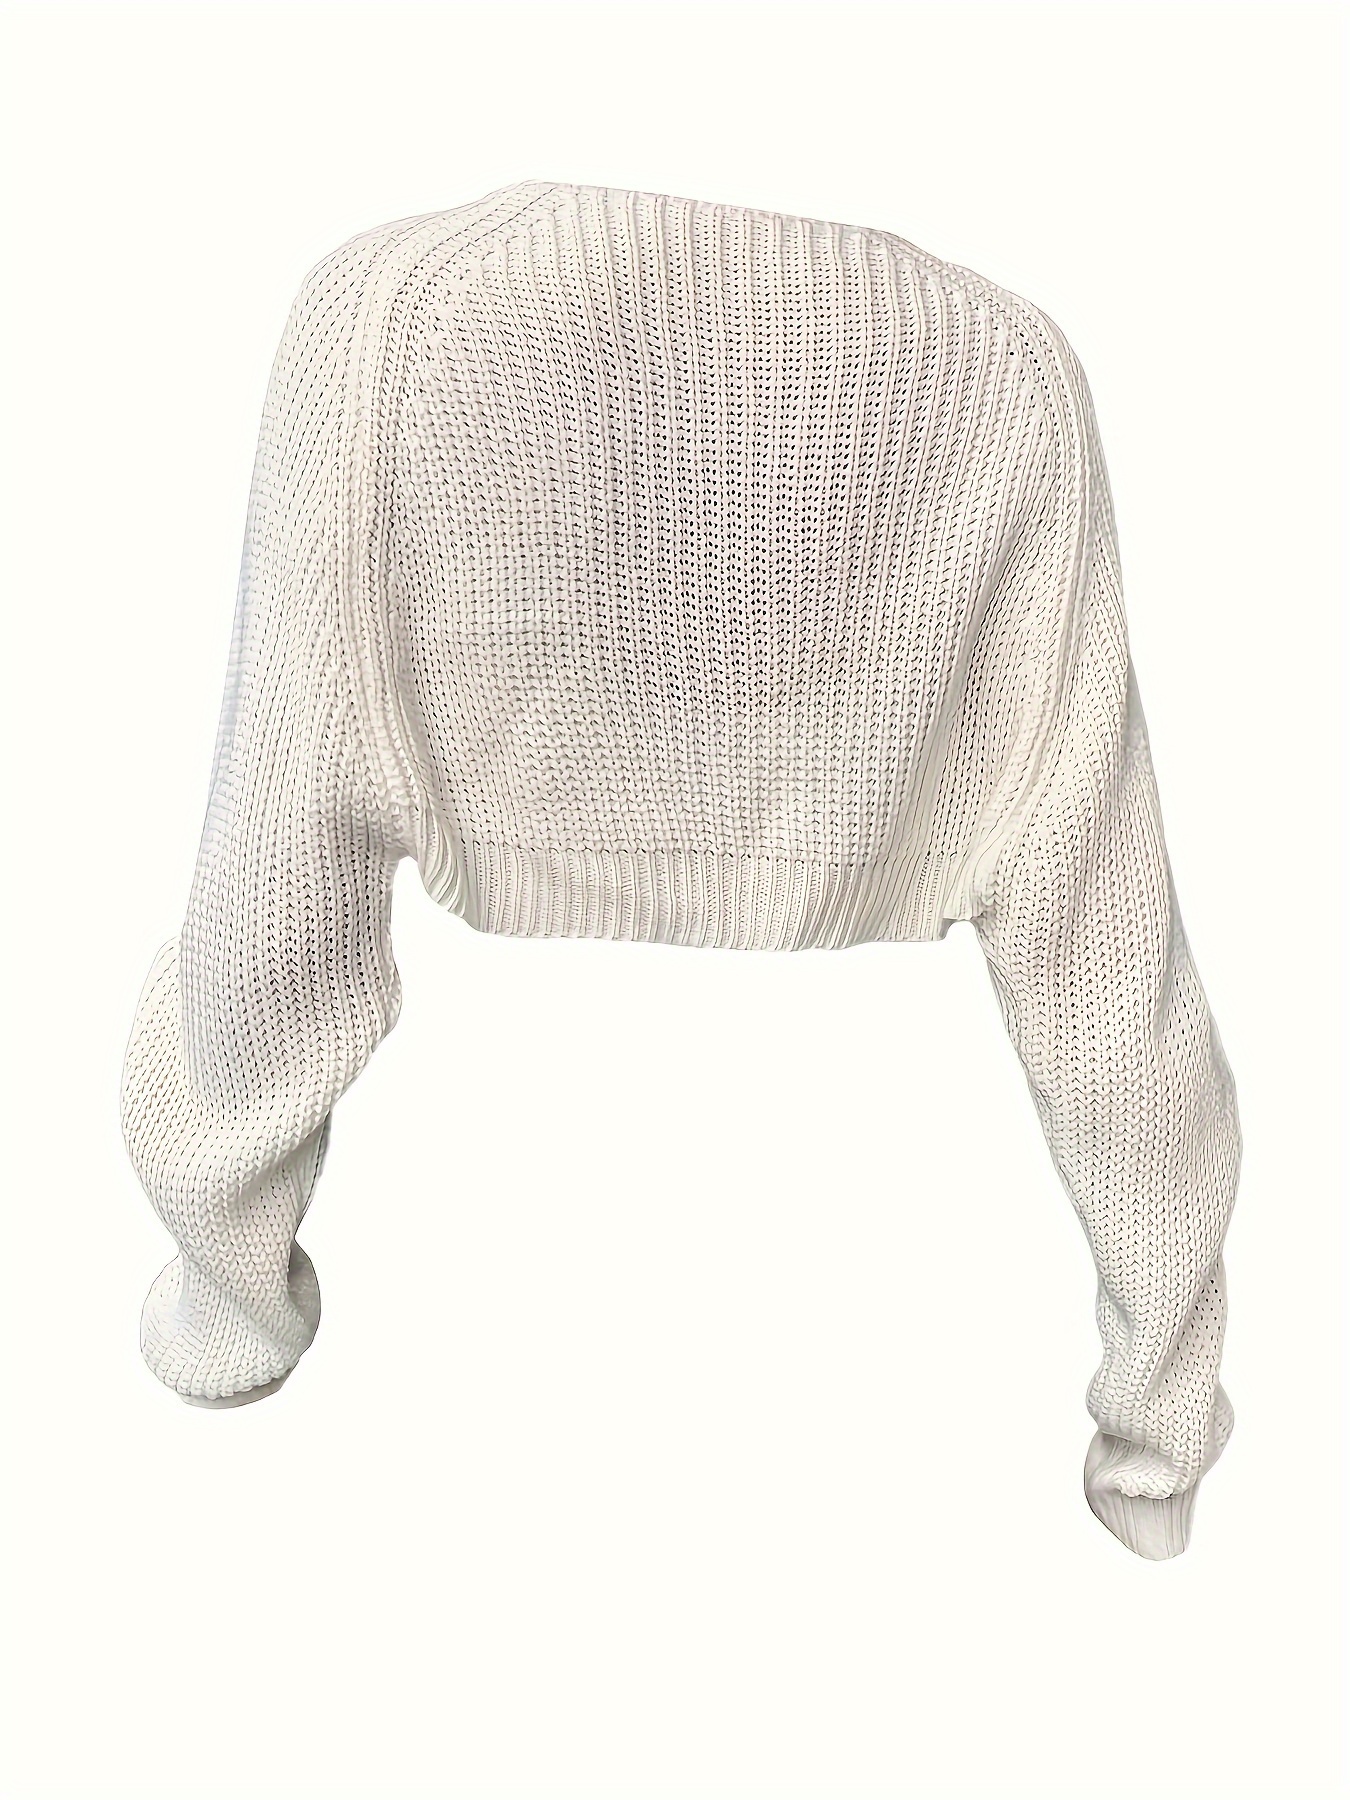 Topshop Black white Knitted Sweater size 12 NWT  White knit sweater,  Clothes design, Knitted sweaters